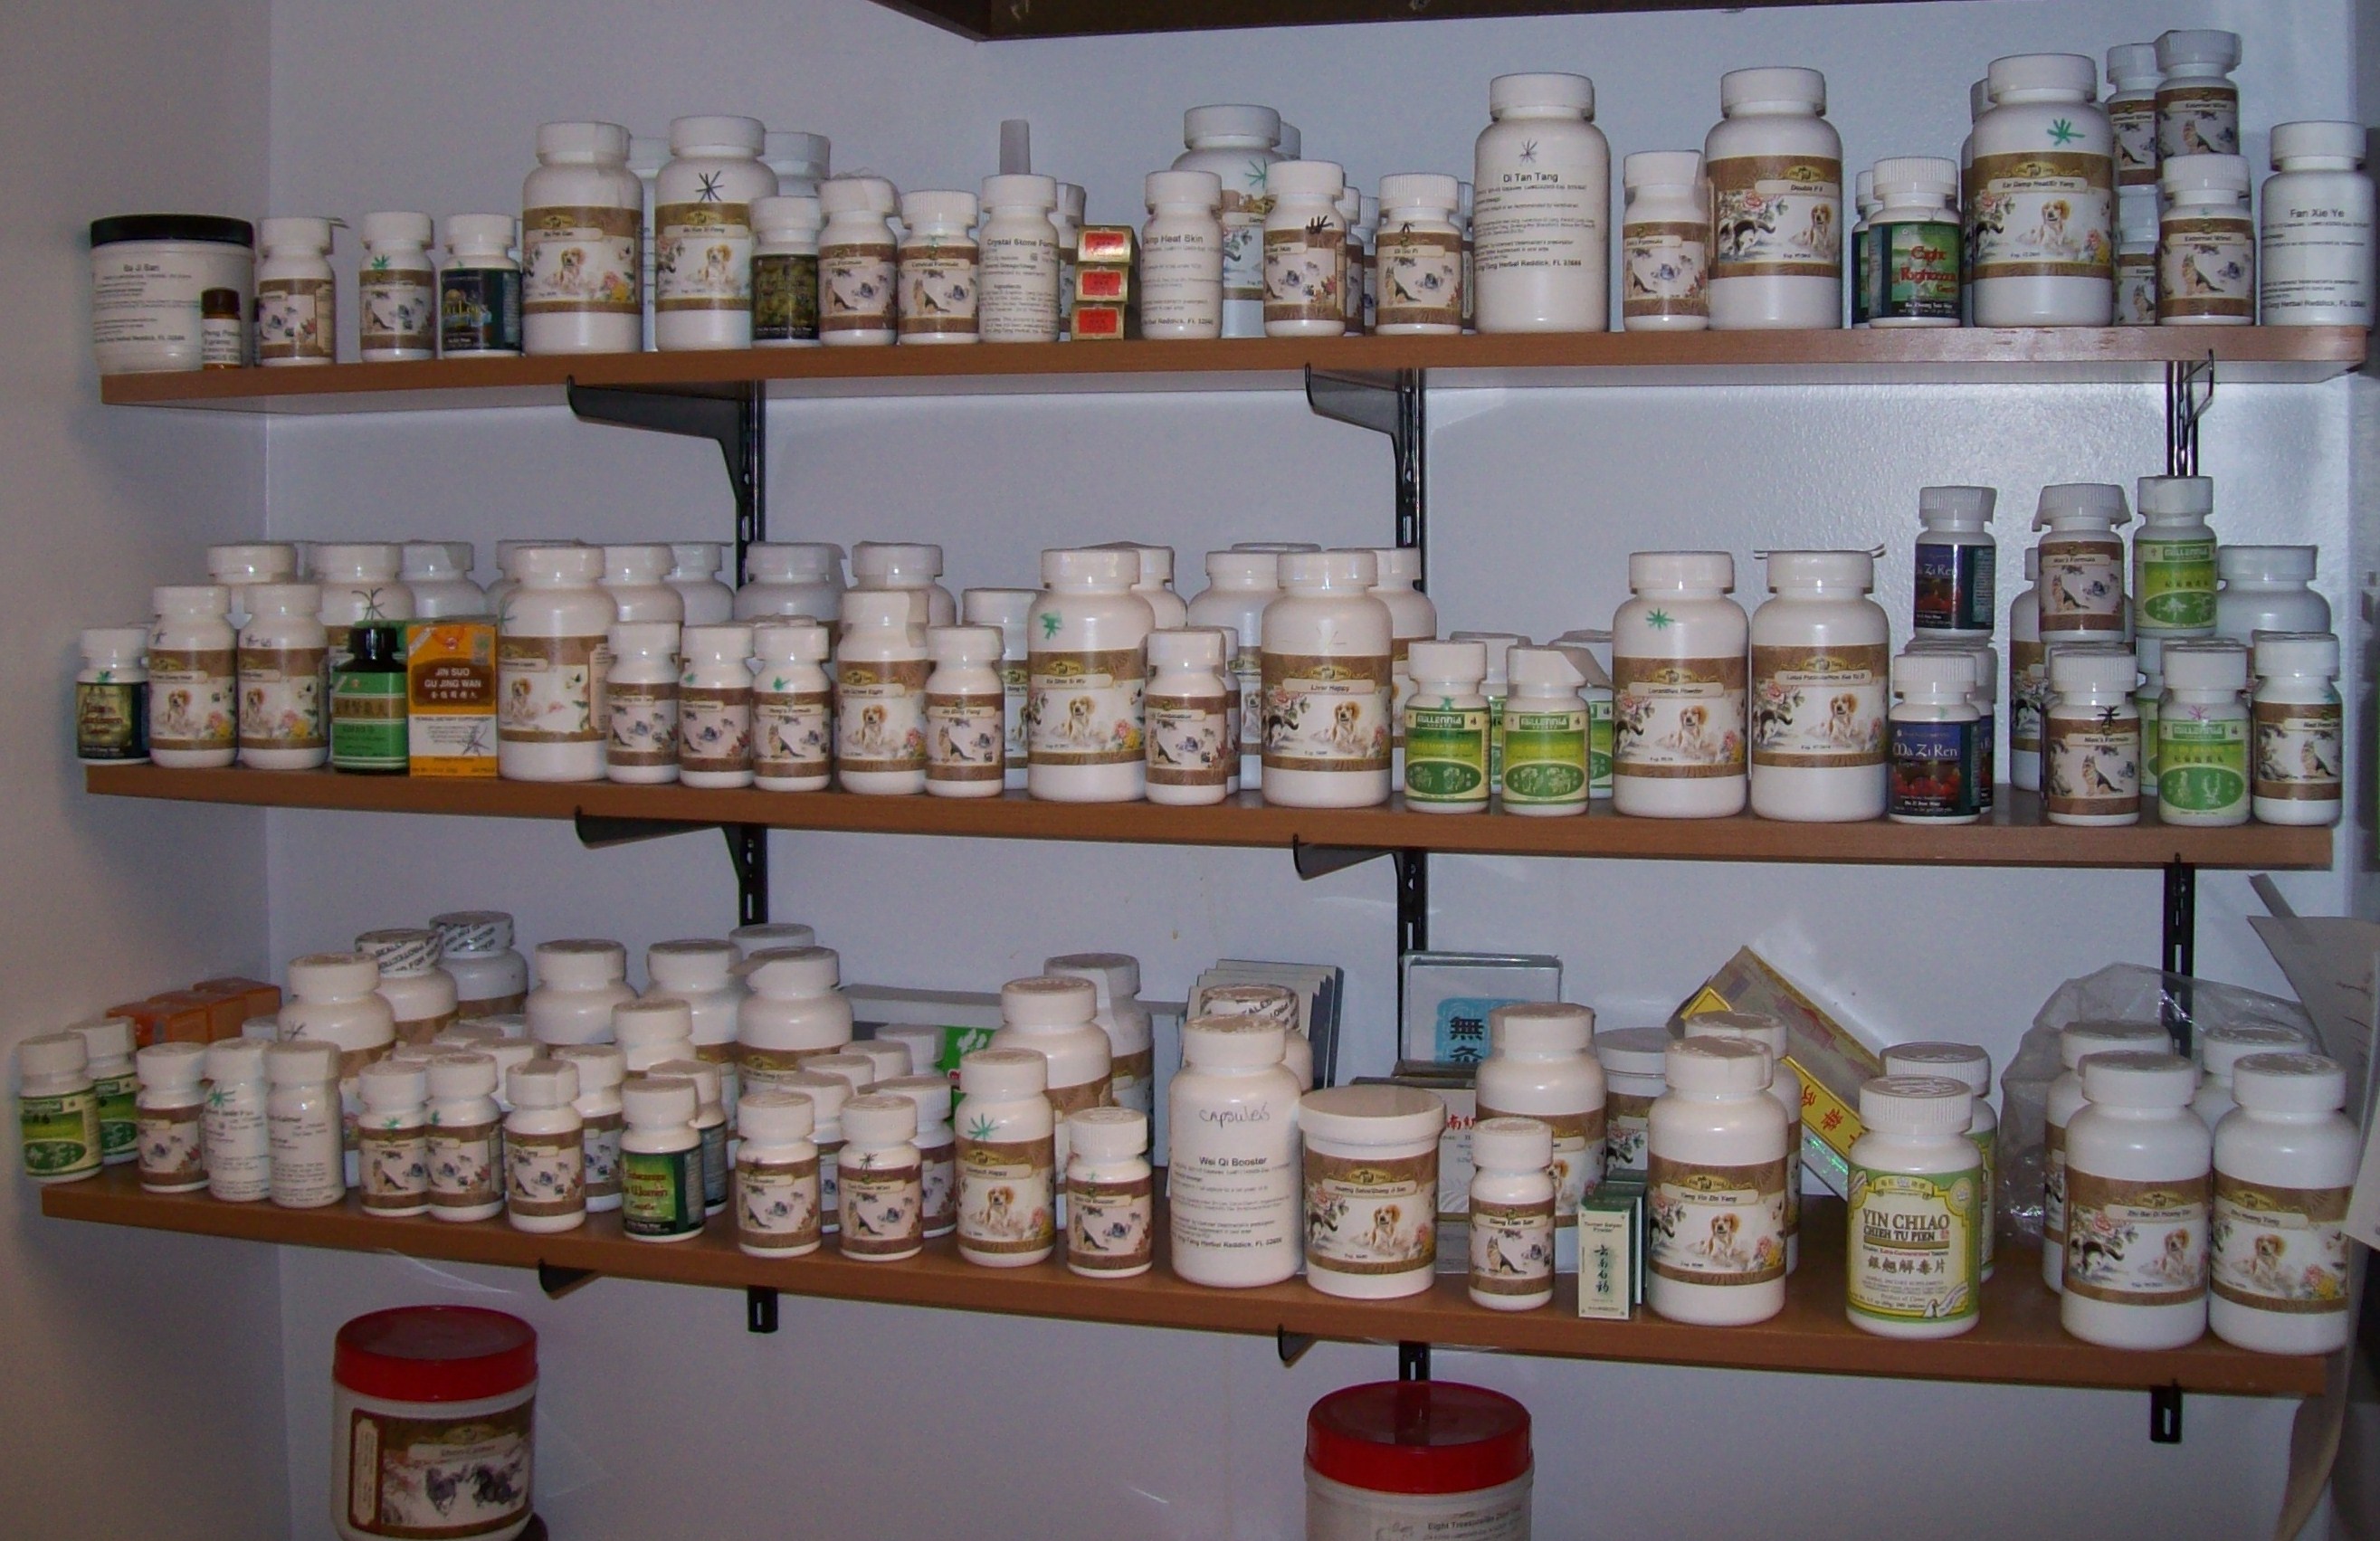 ARK Veterinary Services Inc. - Evansville, IN - Offering Chinese Herbals and Alternative Medicine 